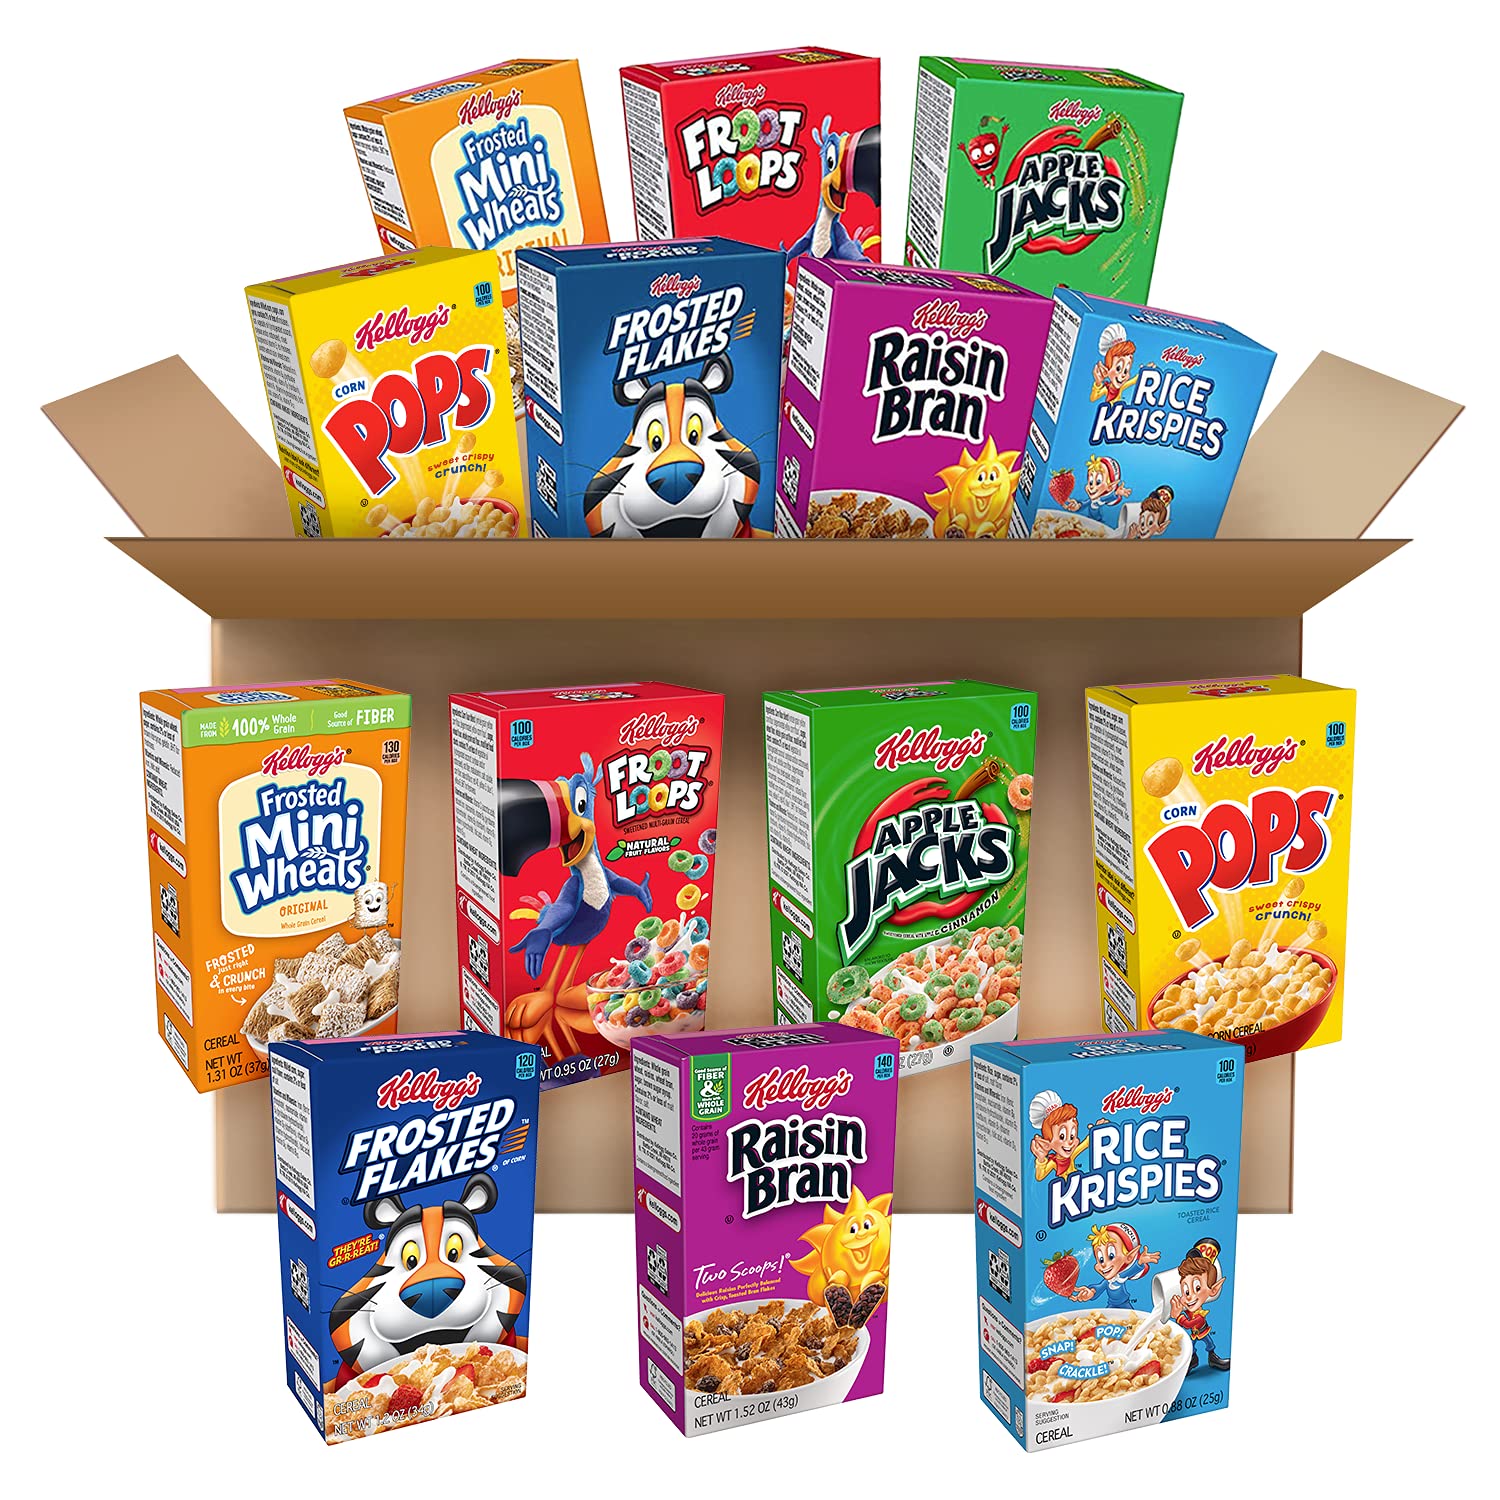 Custom Cereal Boxes Help Boost Your Sale